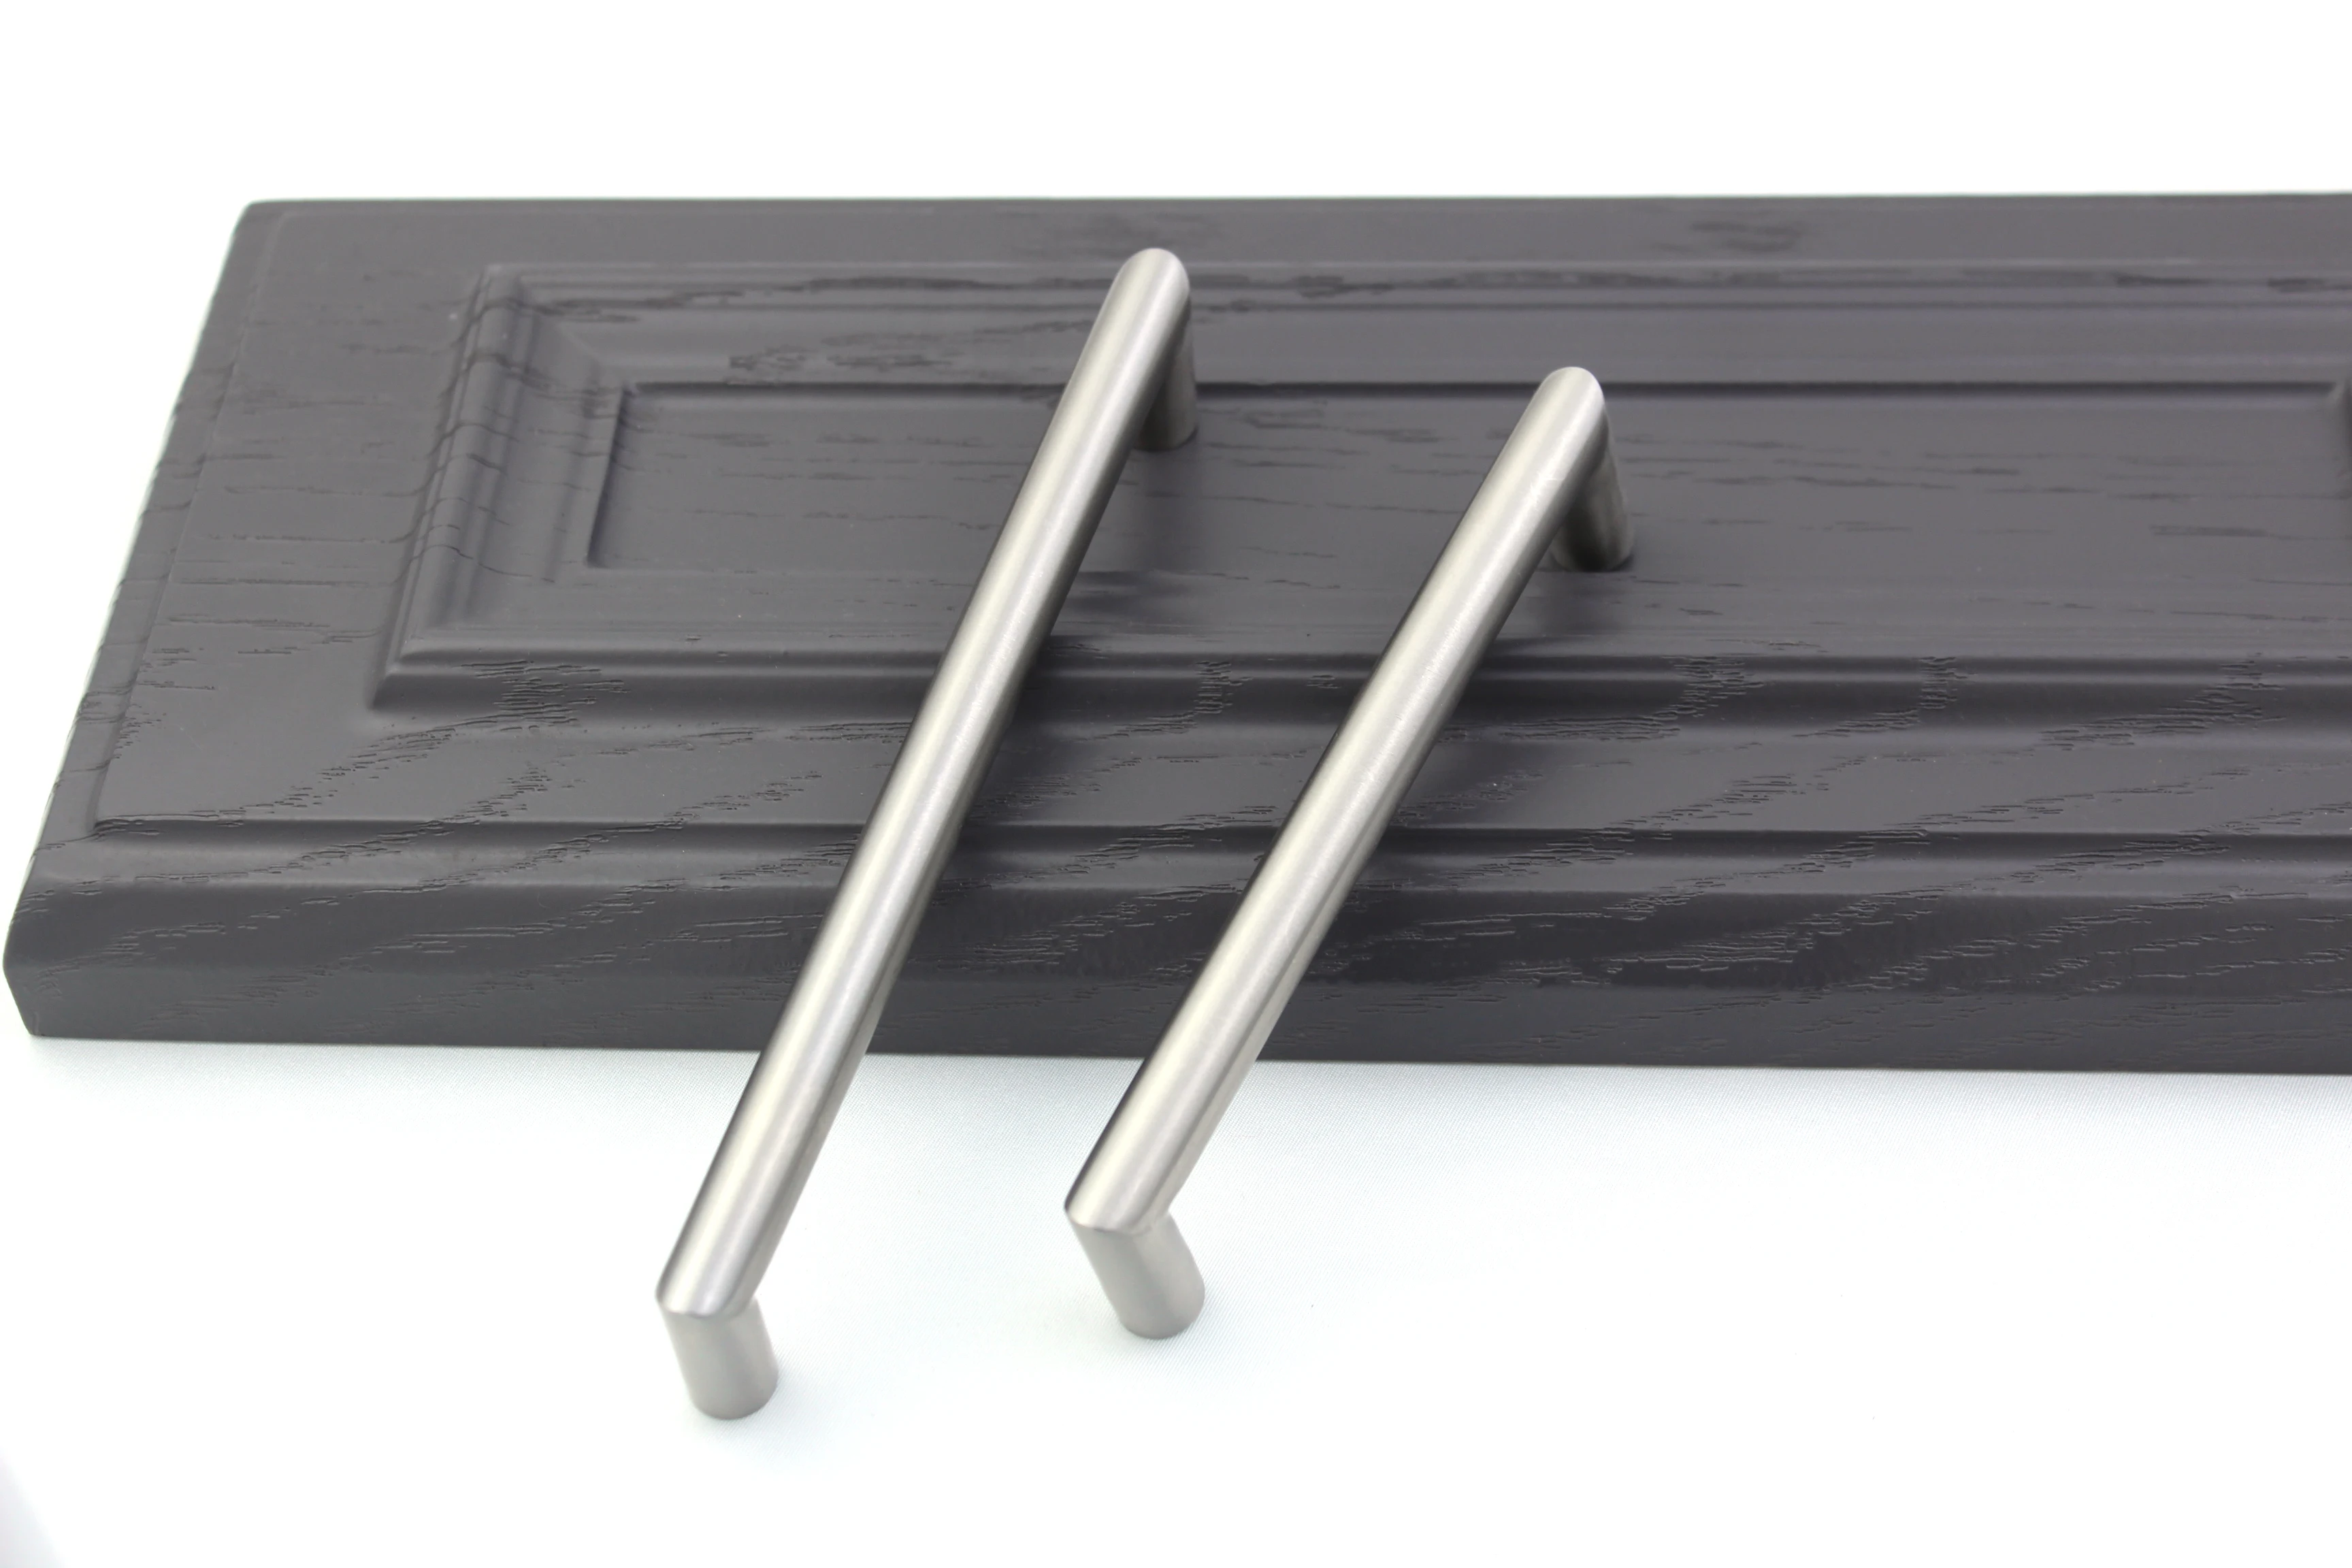 Modern simple design stainless steel material kitchen cabinet handles